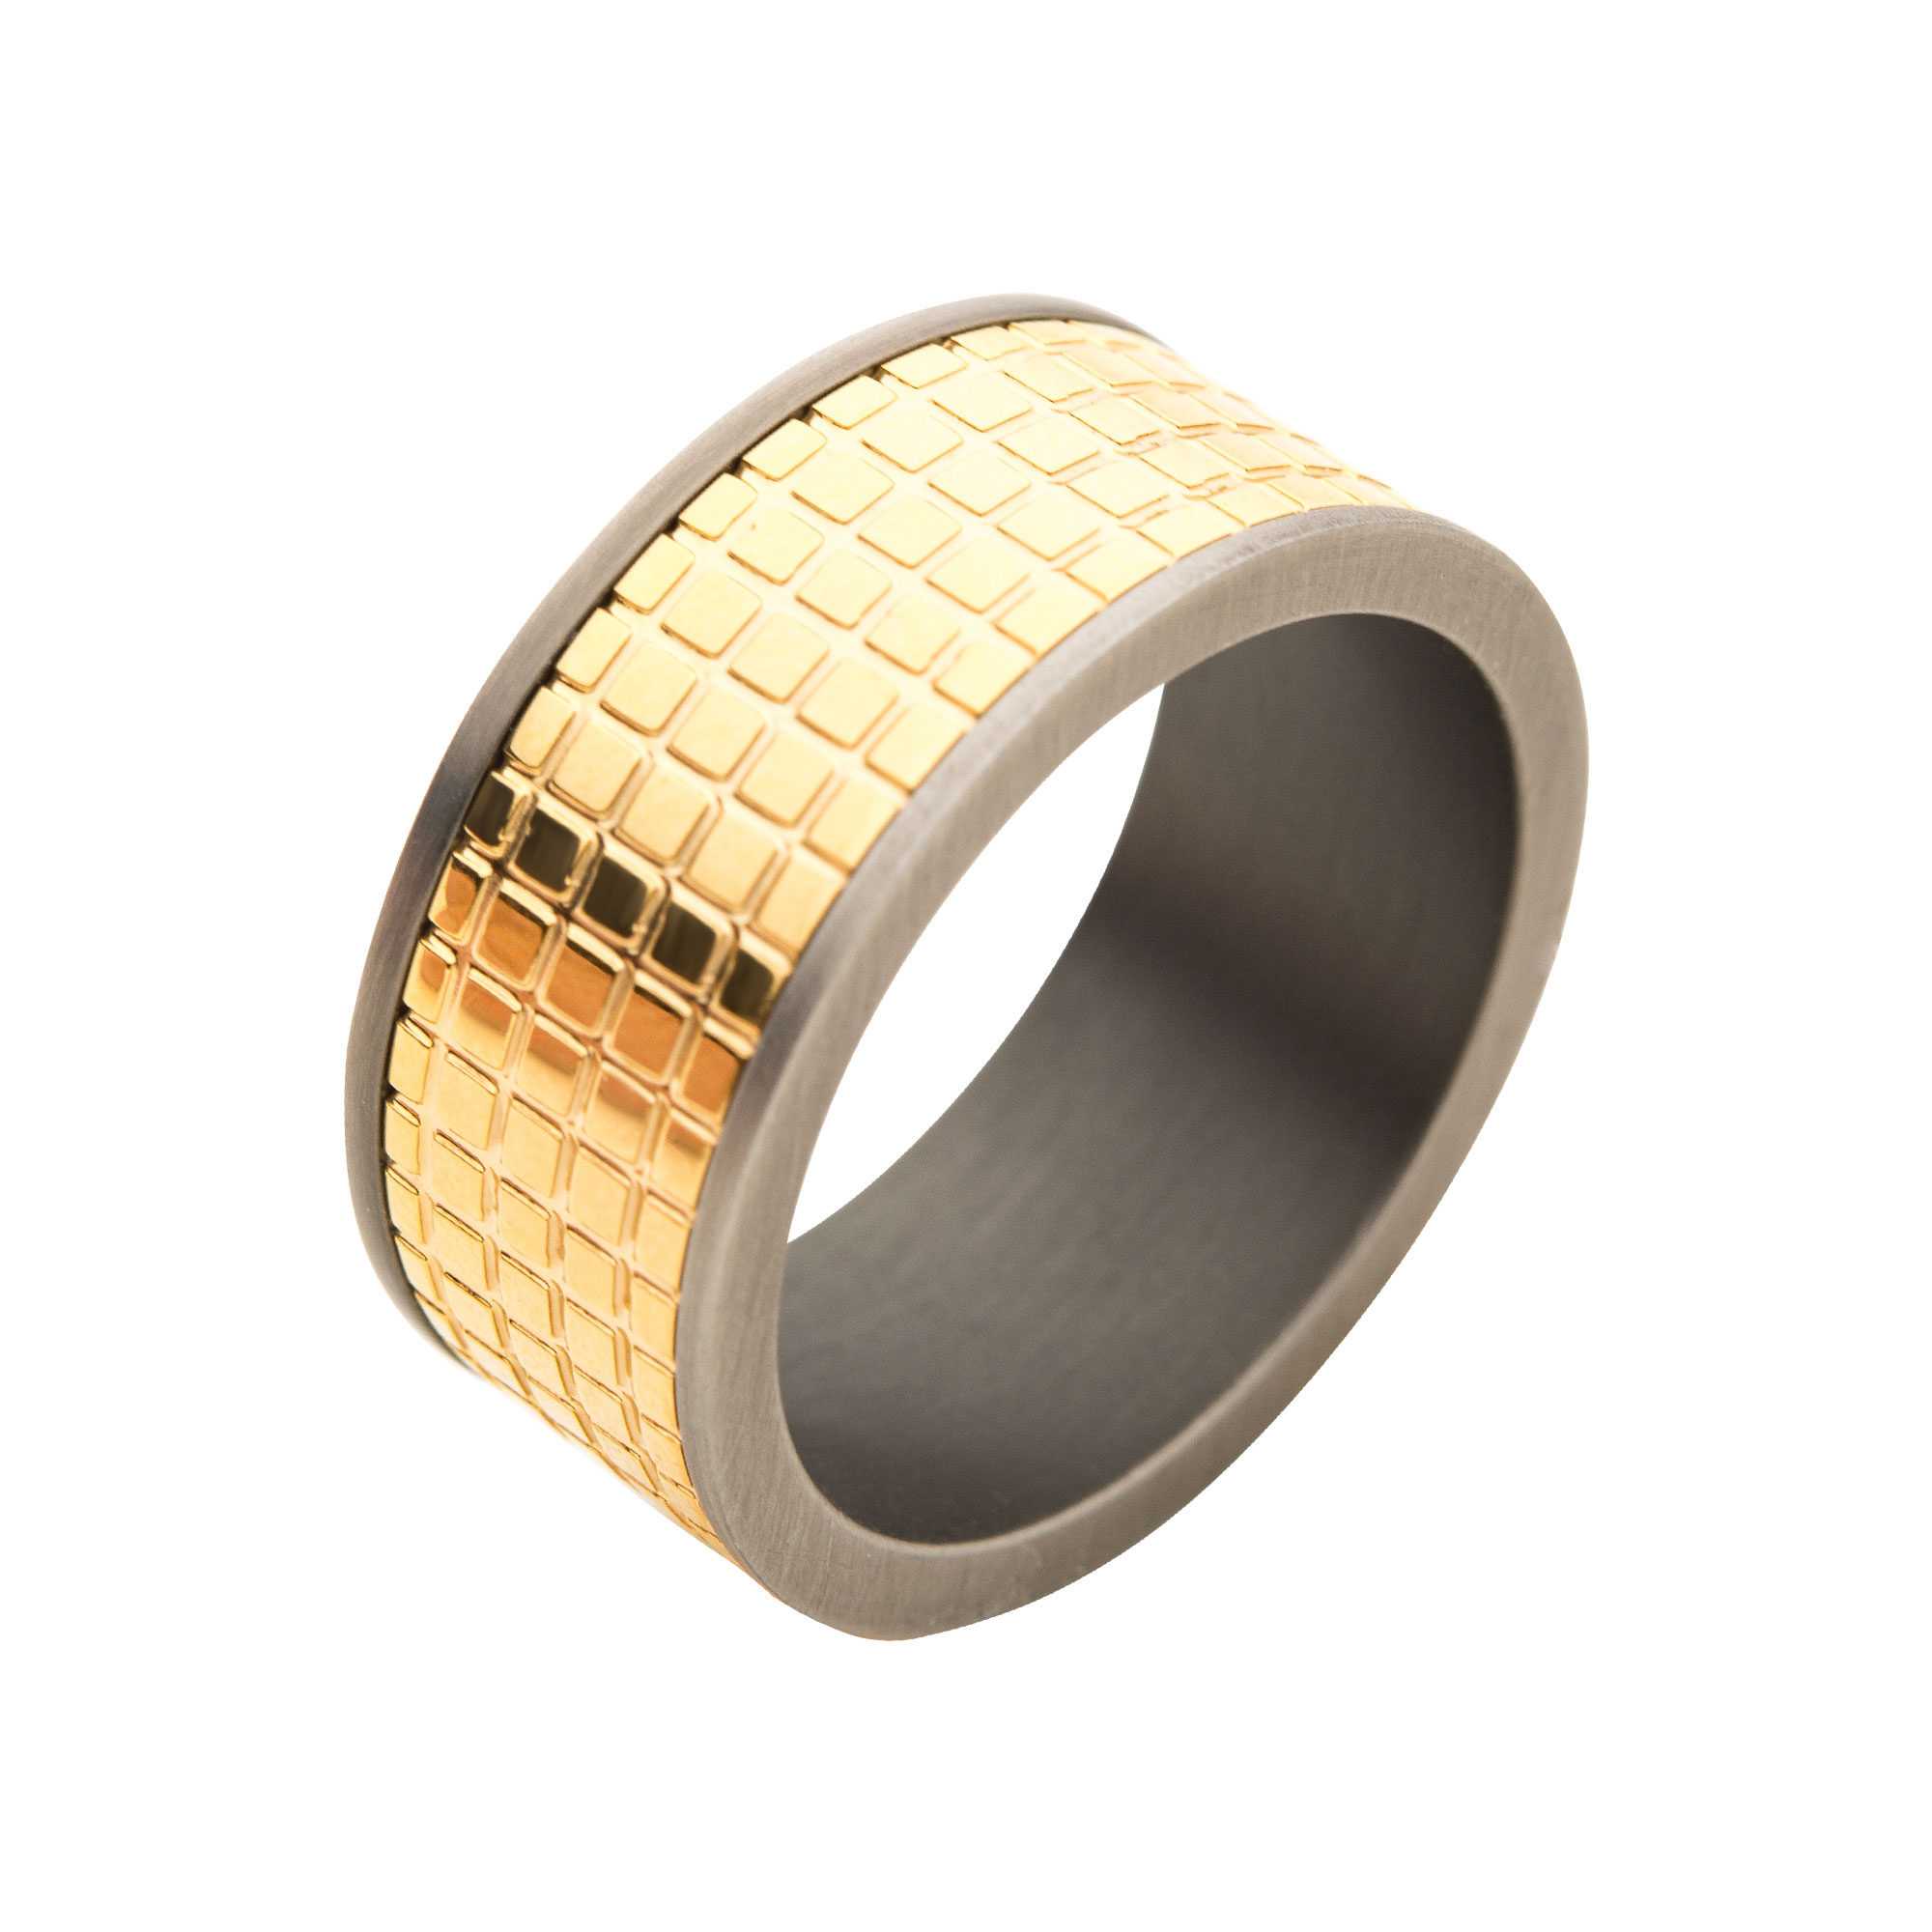 Gun Metal Plated with 18K Gold Plated Grid Inlay Ring P.K. Bennett Jewelers Mundelein, IL